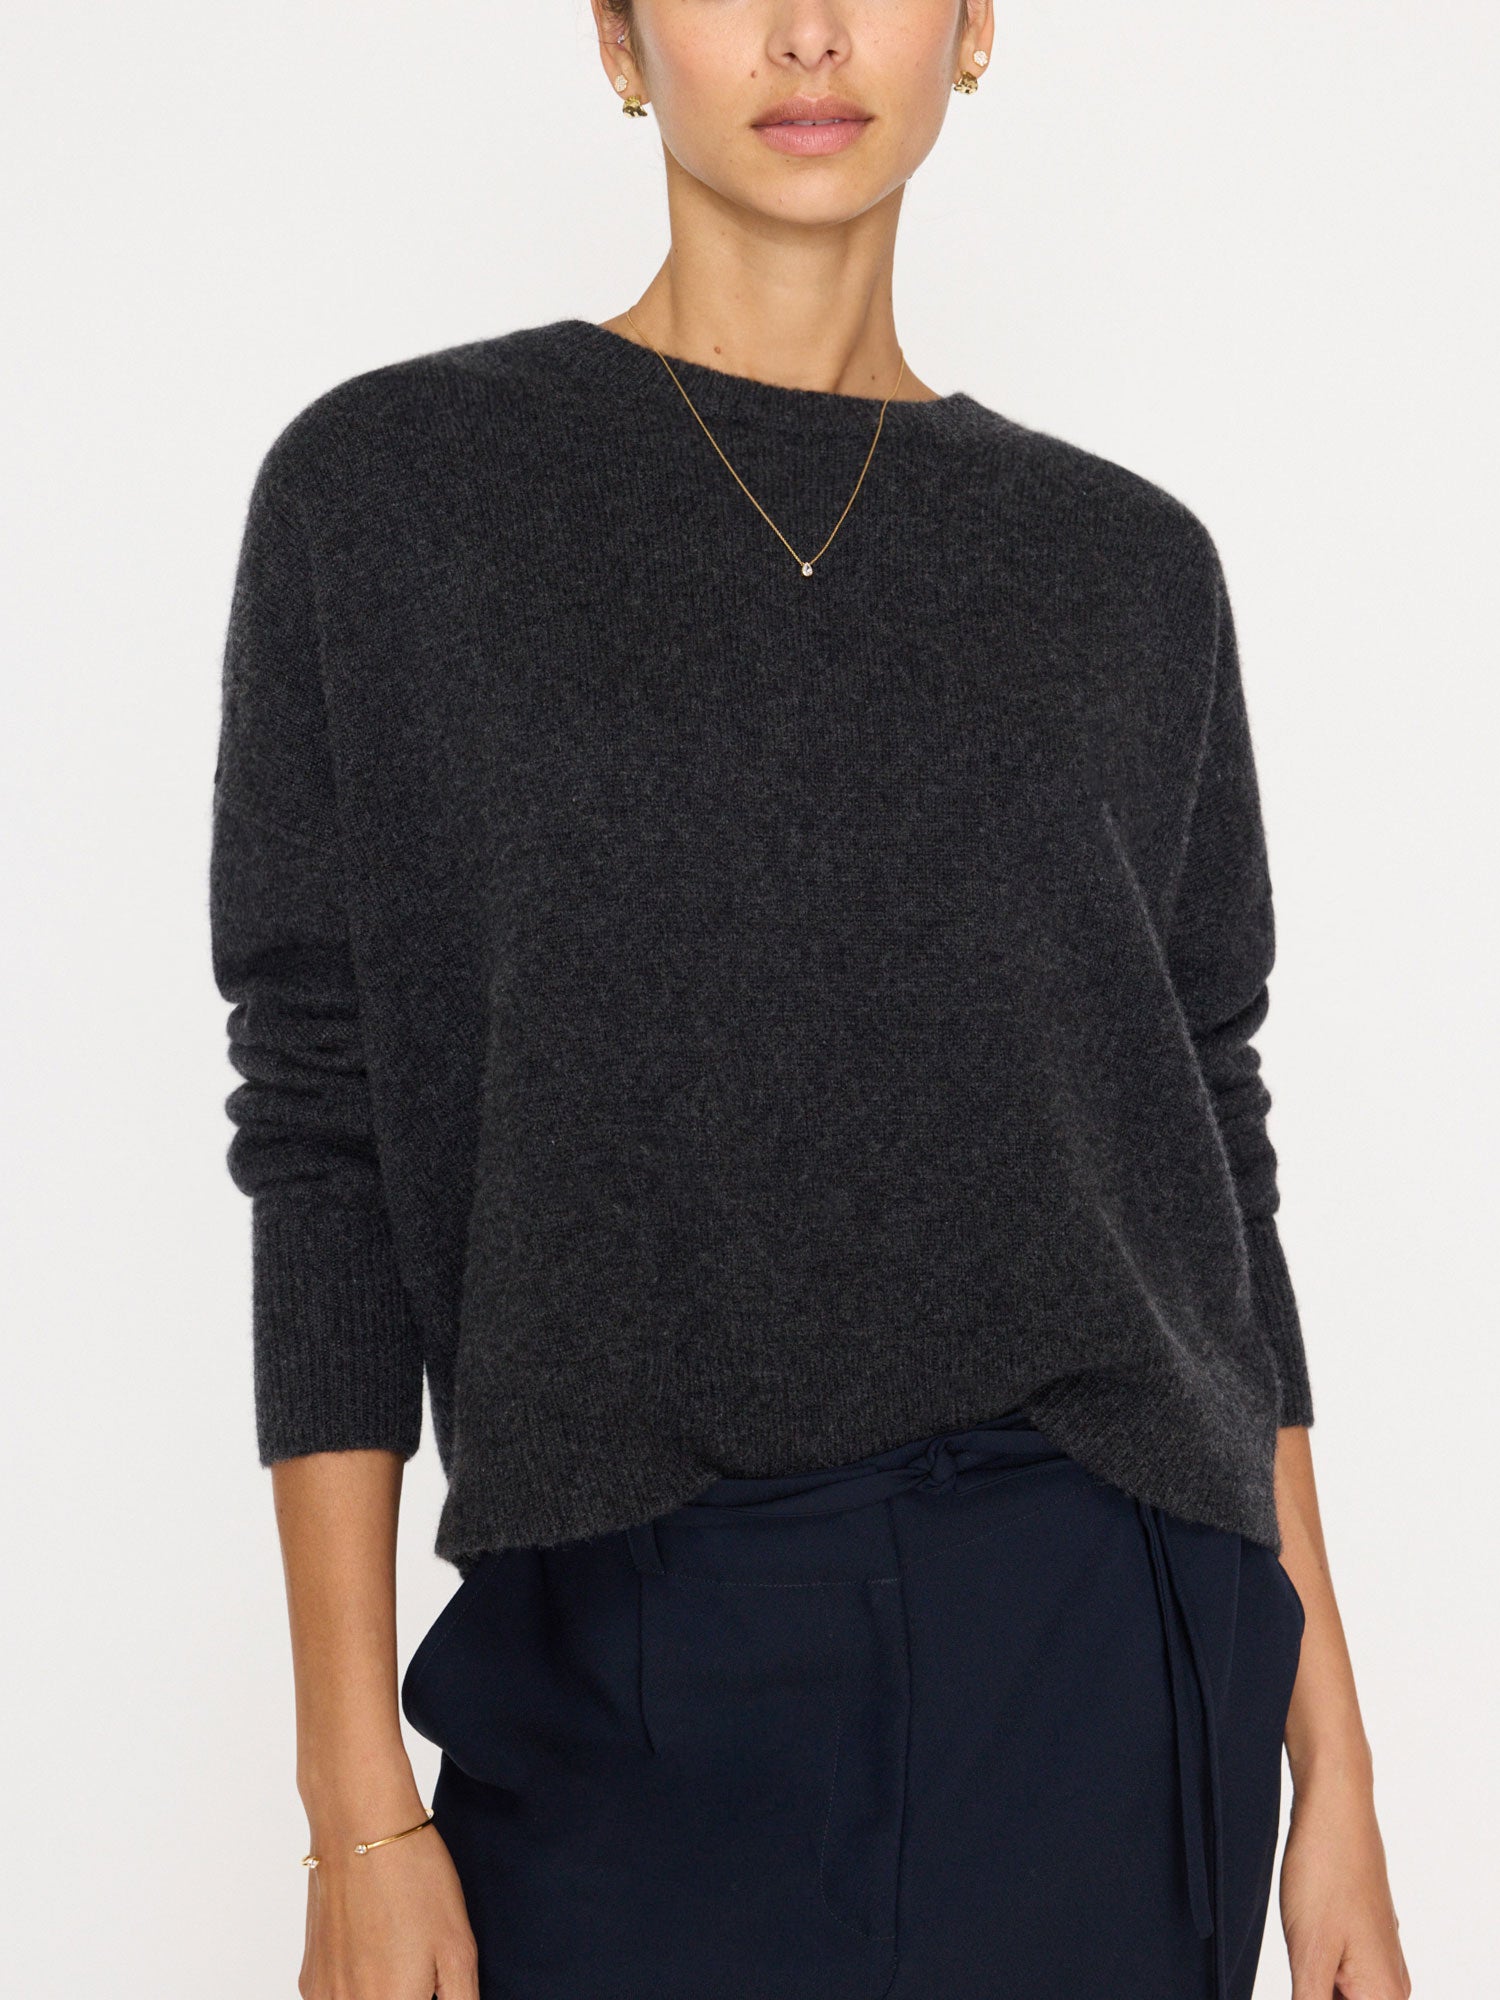 Everyday cashmere crewneck grey sweater front view